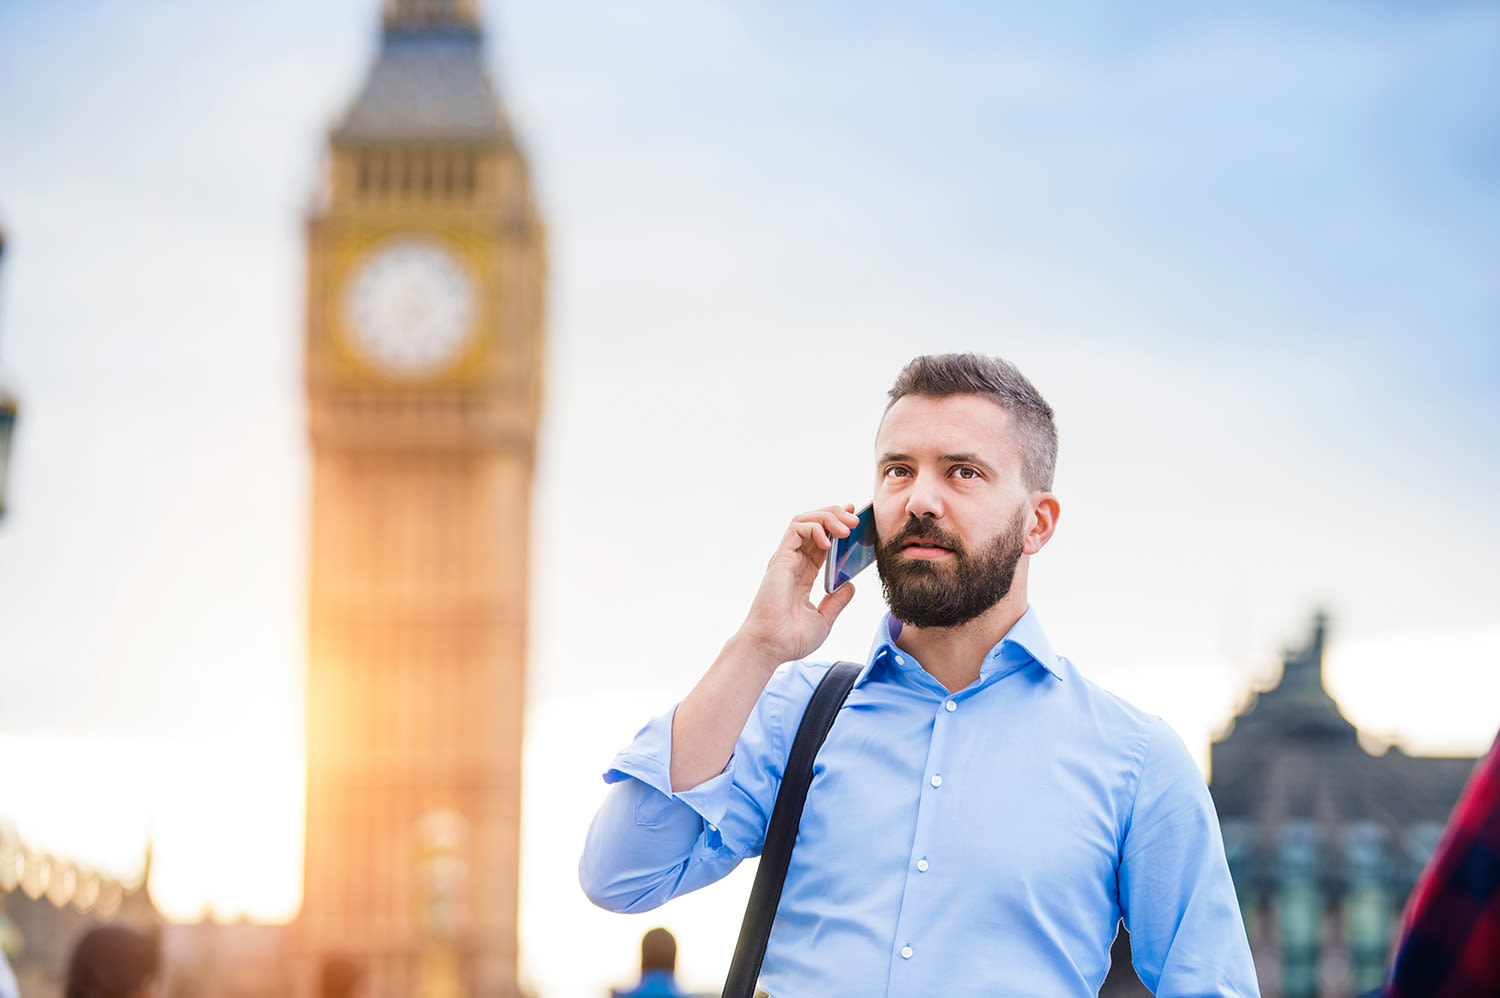 A man talking on a mobile phone in front of Big Ben